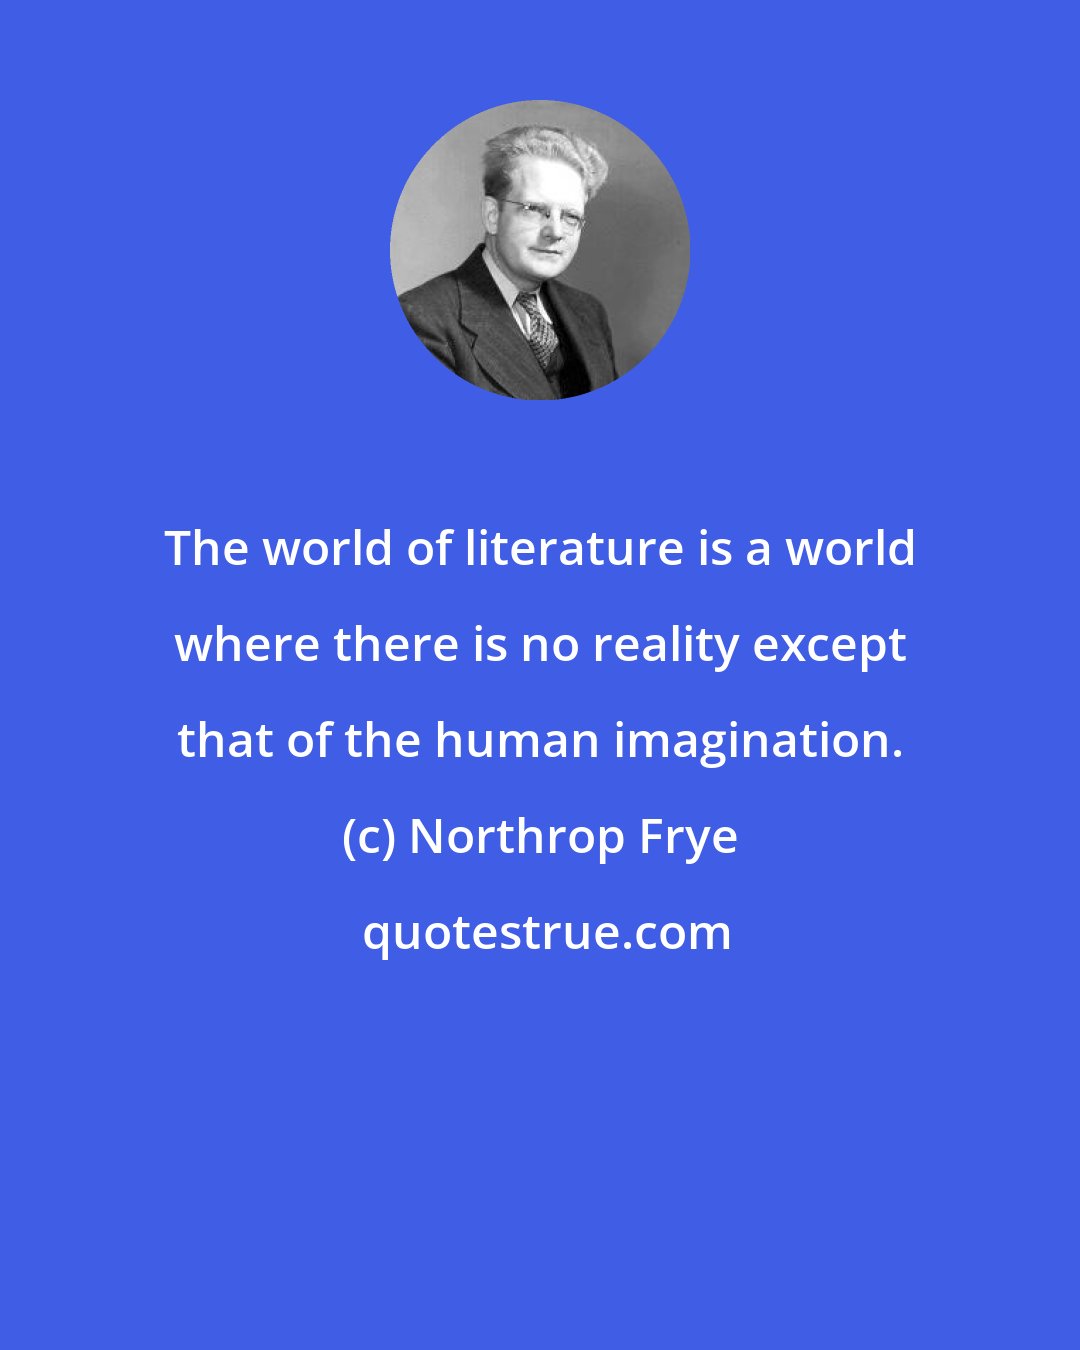 Northrop Frye: The world of literature is a world where there is no reality except that of the human imagination.